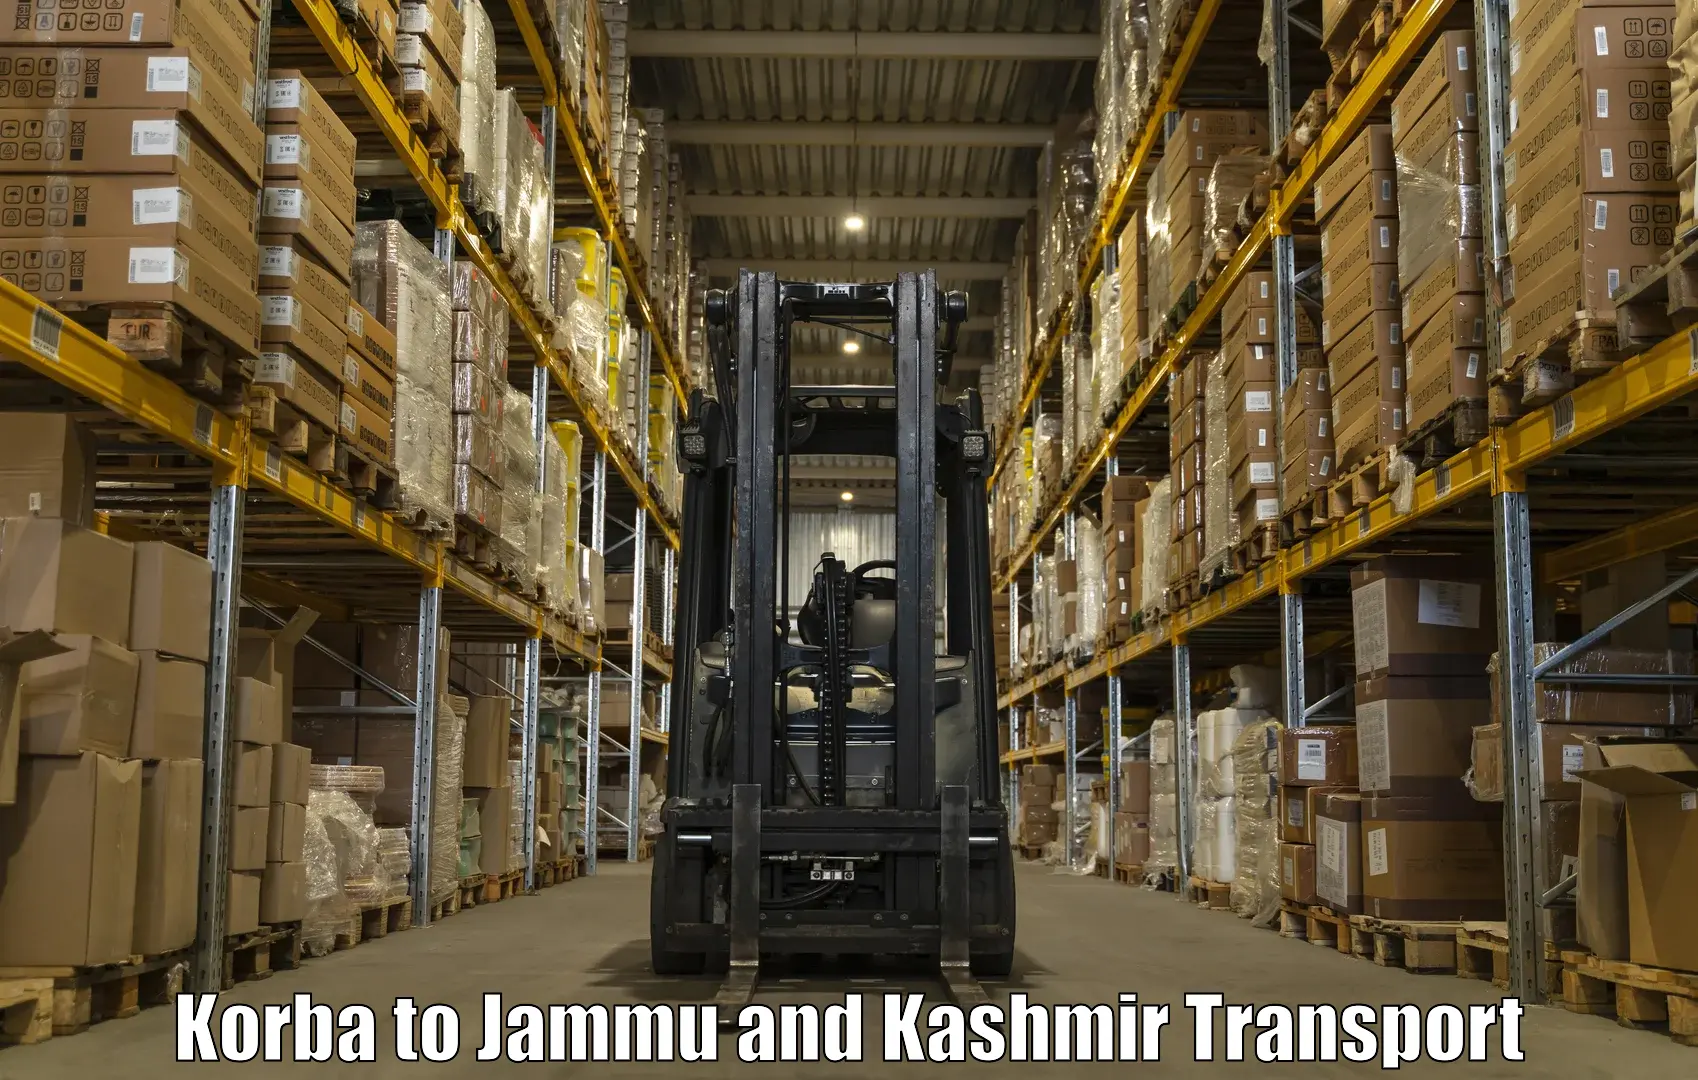 Truck transport companies in India Korba to Pulwama